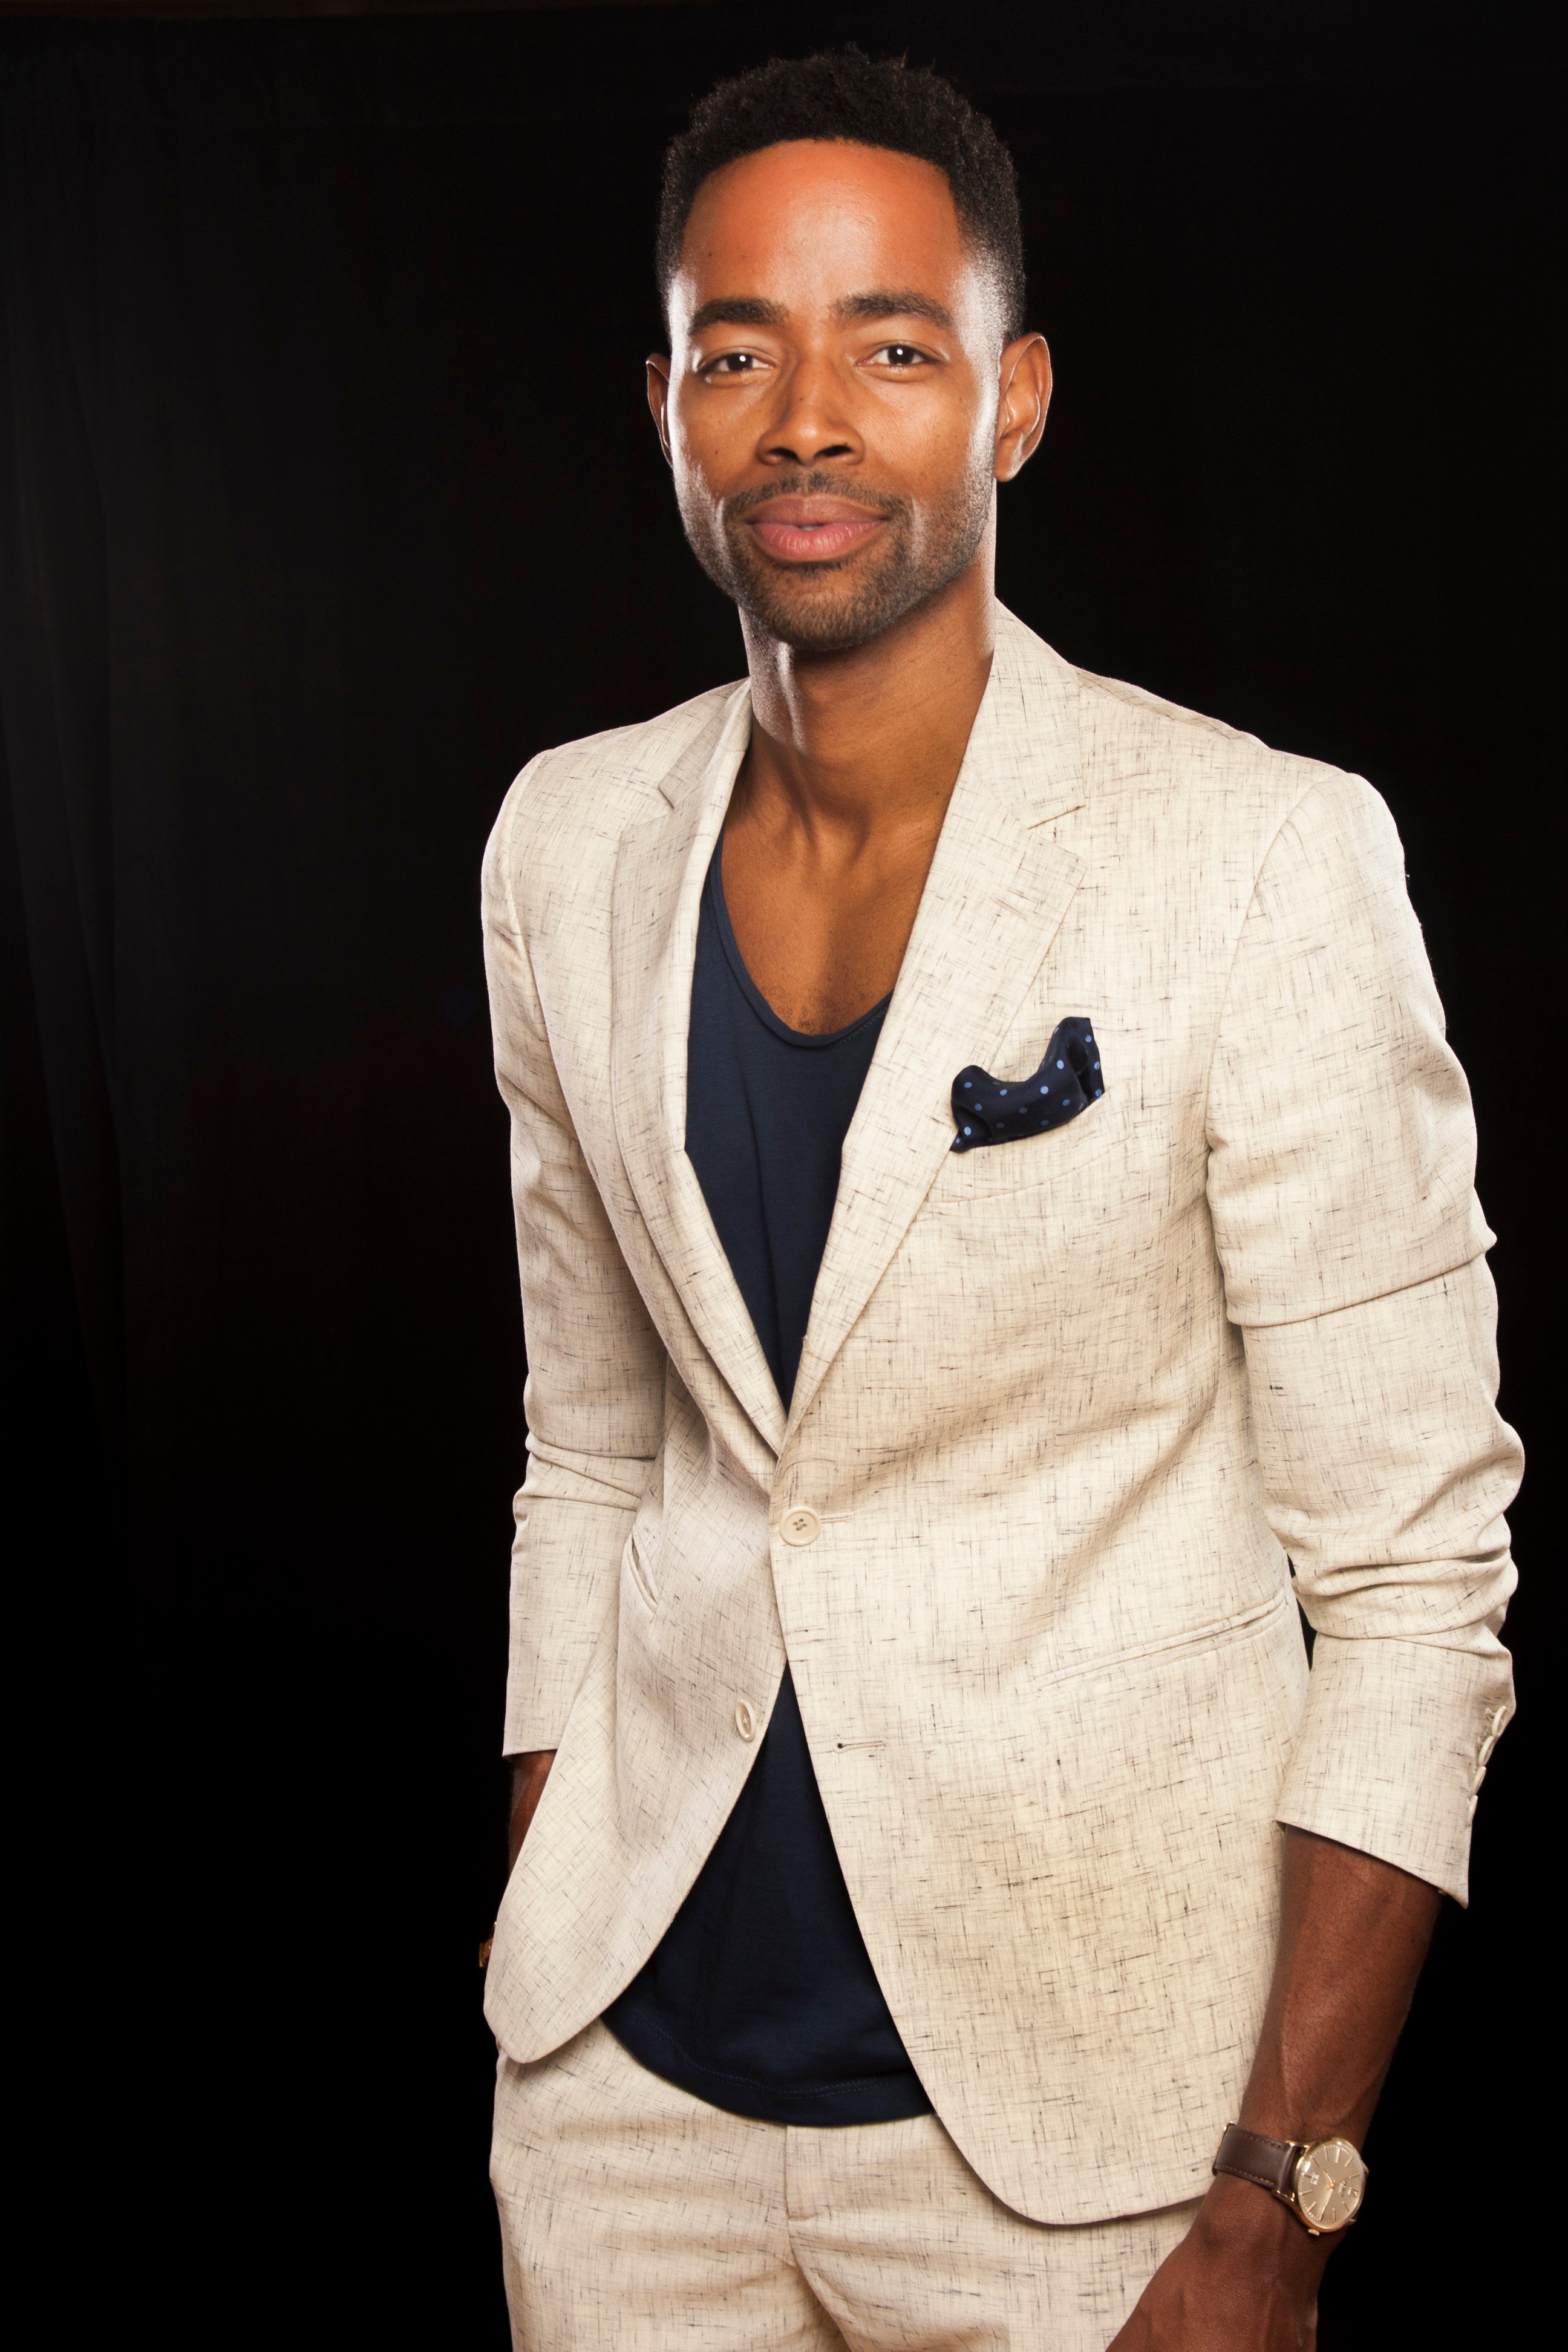 Lawrence May Be Cancelled, But These Photos Prove Jay Ellis Is Still Forever Bae